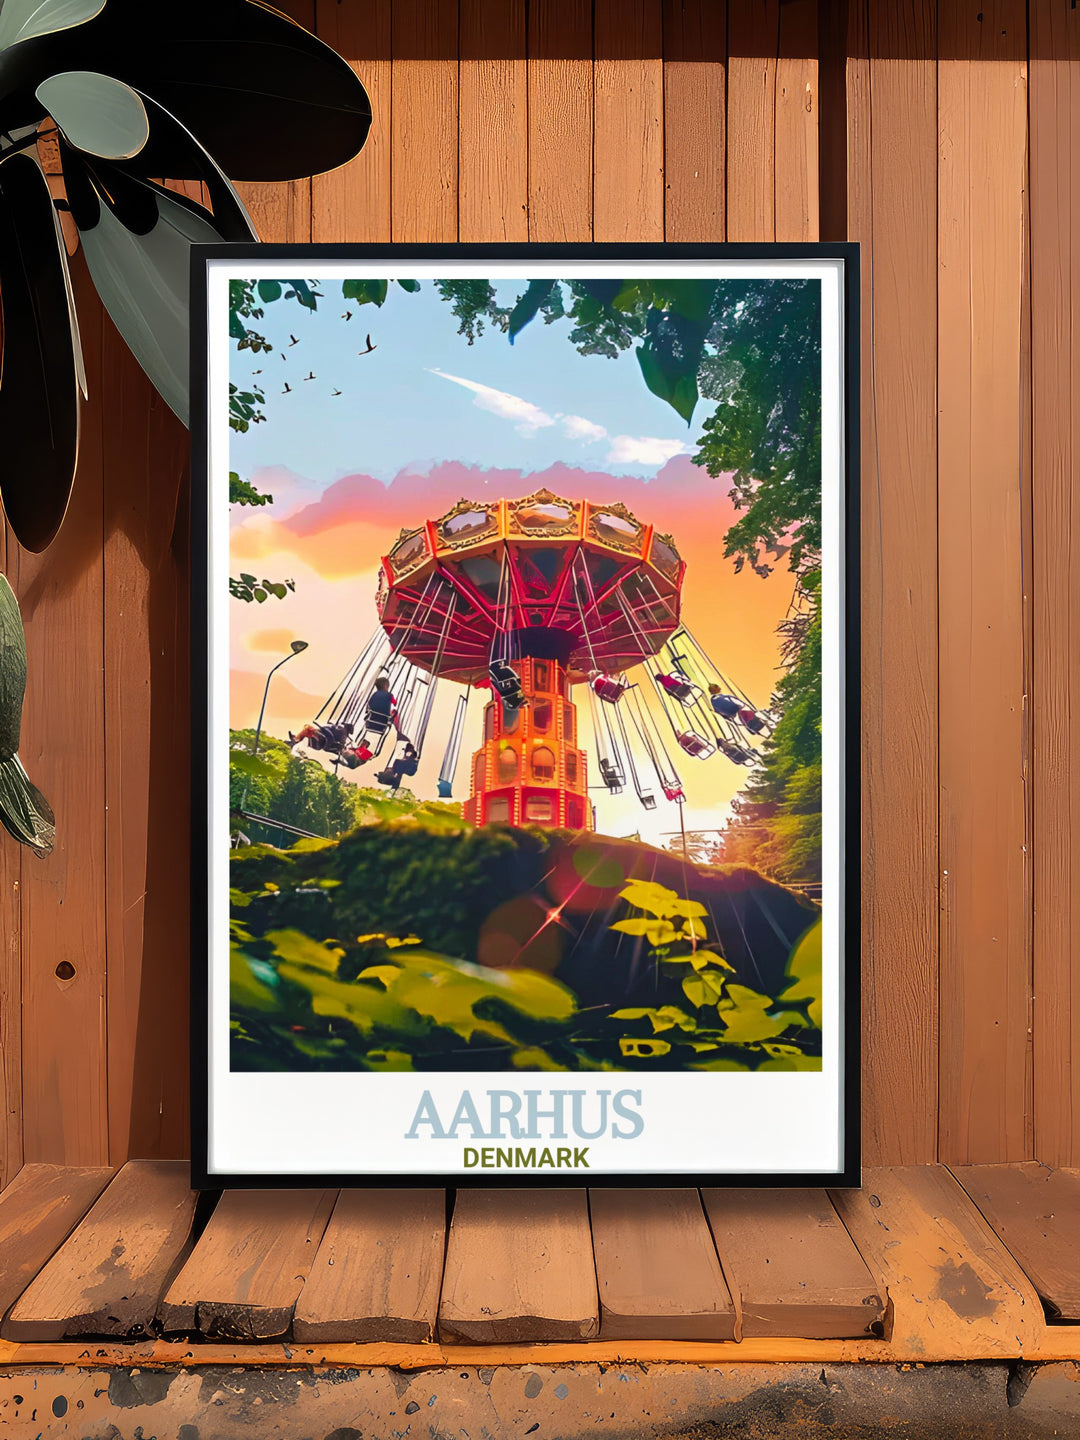 Bring home the charm of Tivoli Friheden with this beautiful Aarhus painting. Perfect for Denmark wall art lovers this print highlights the lively essence of Aarhus making it a great addition to your home decor.